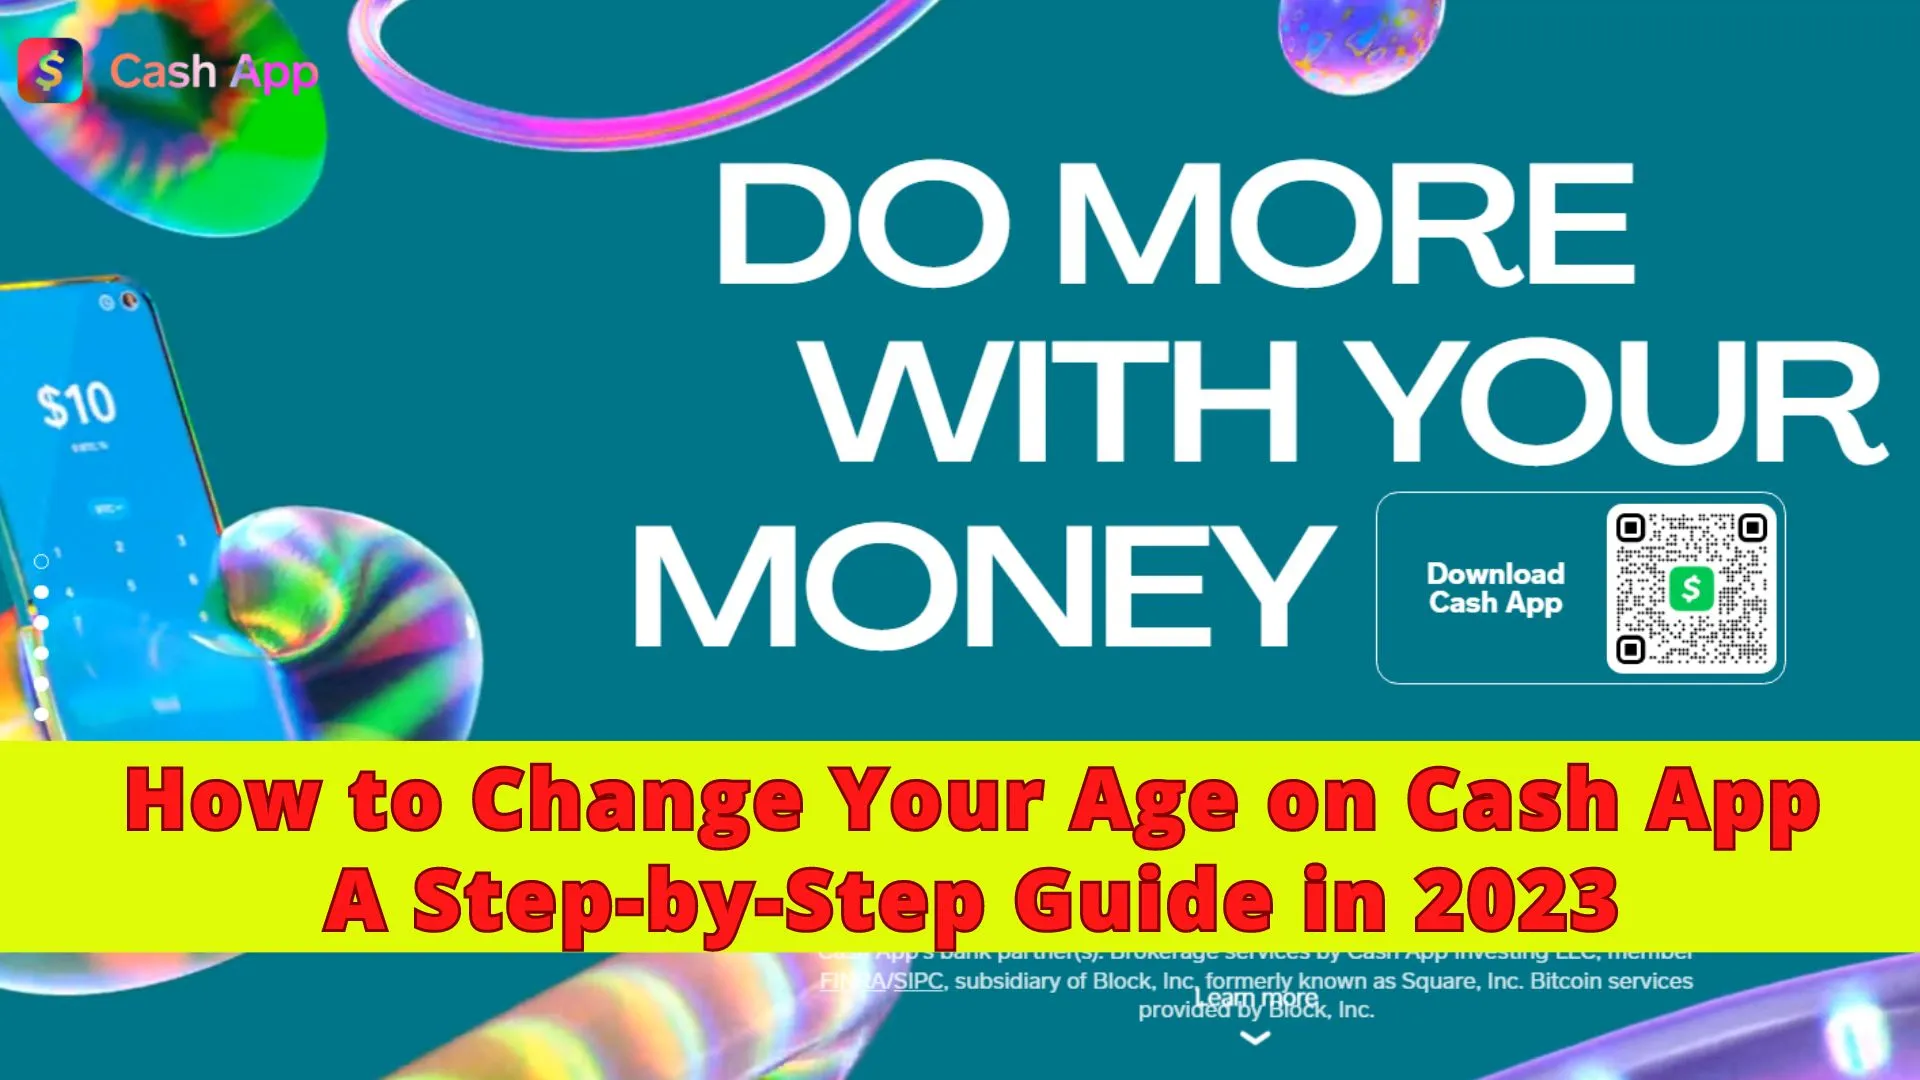 How to Change Your Age on Cash App